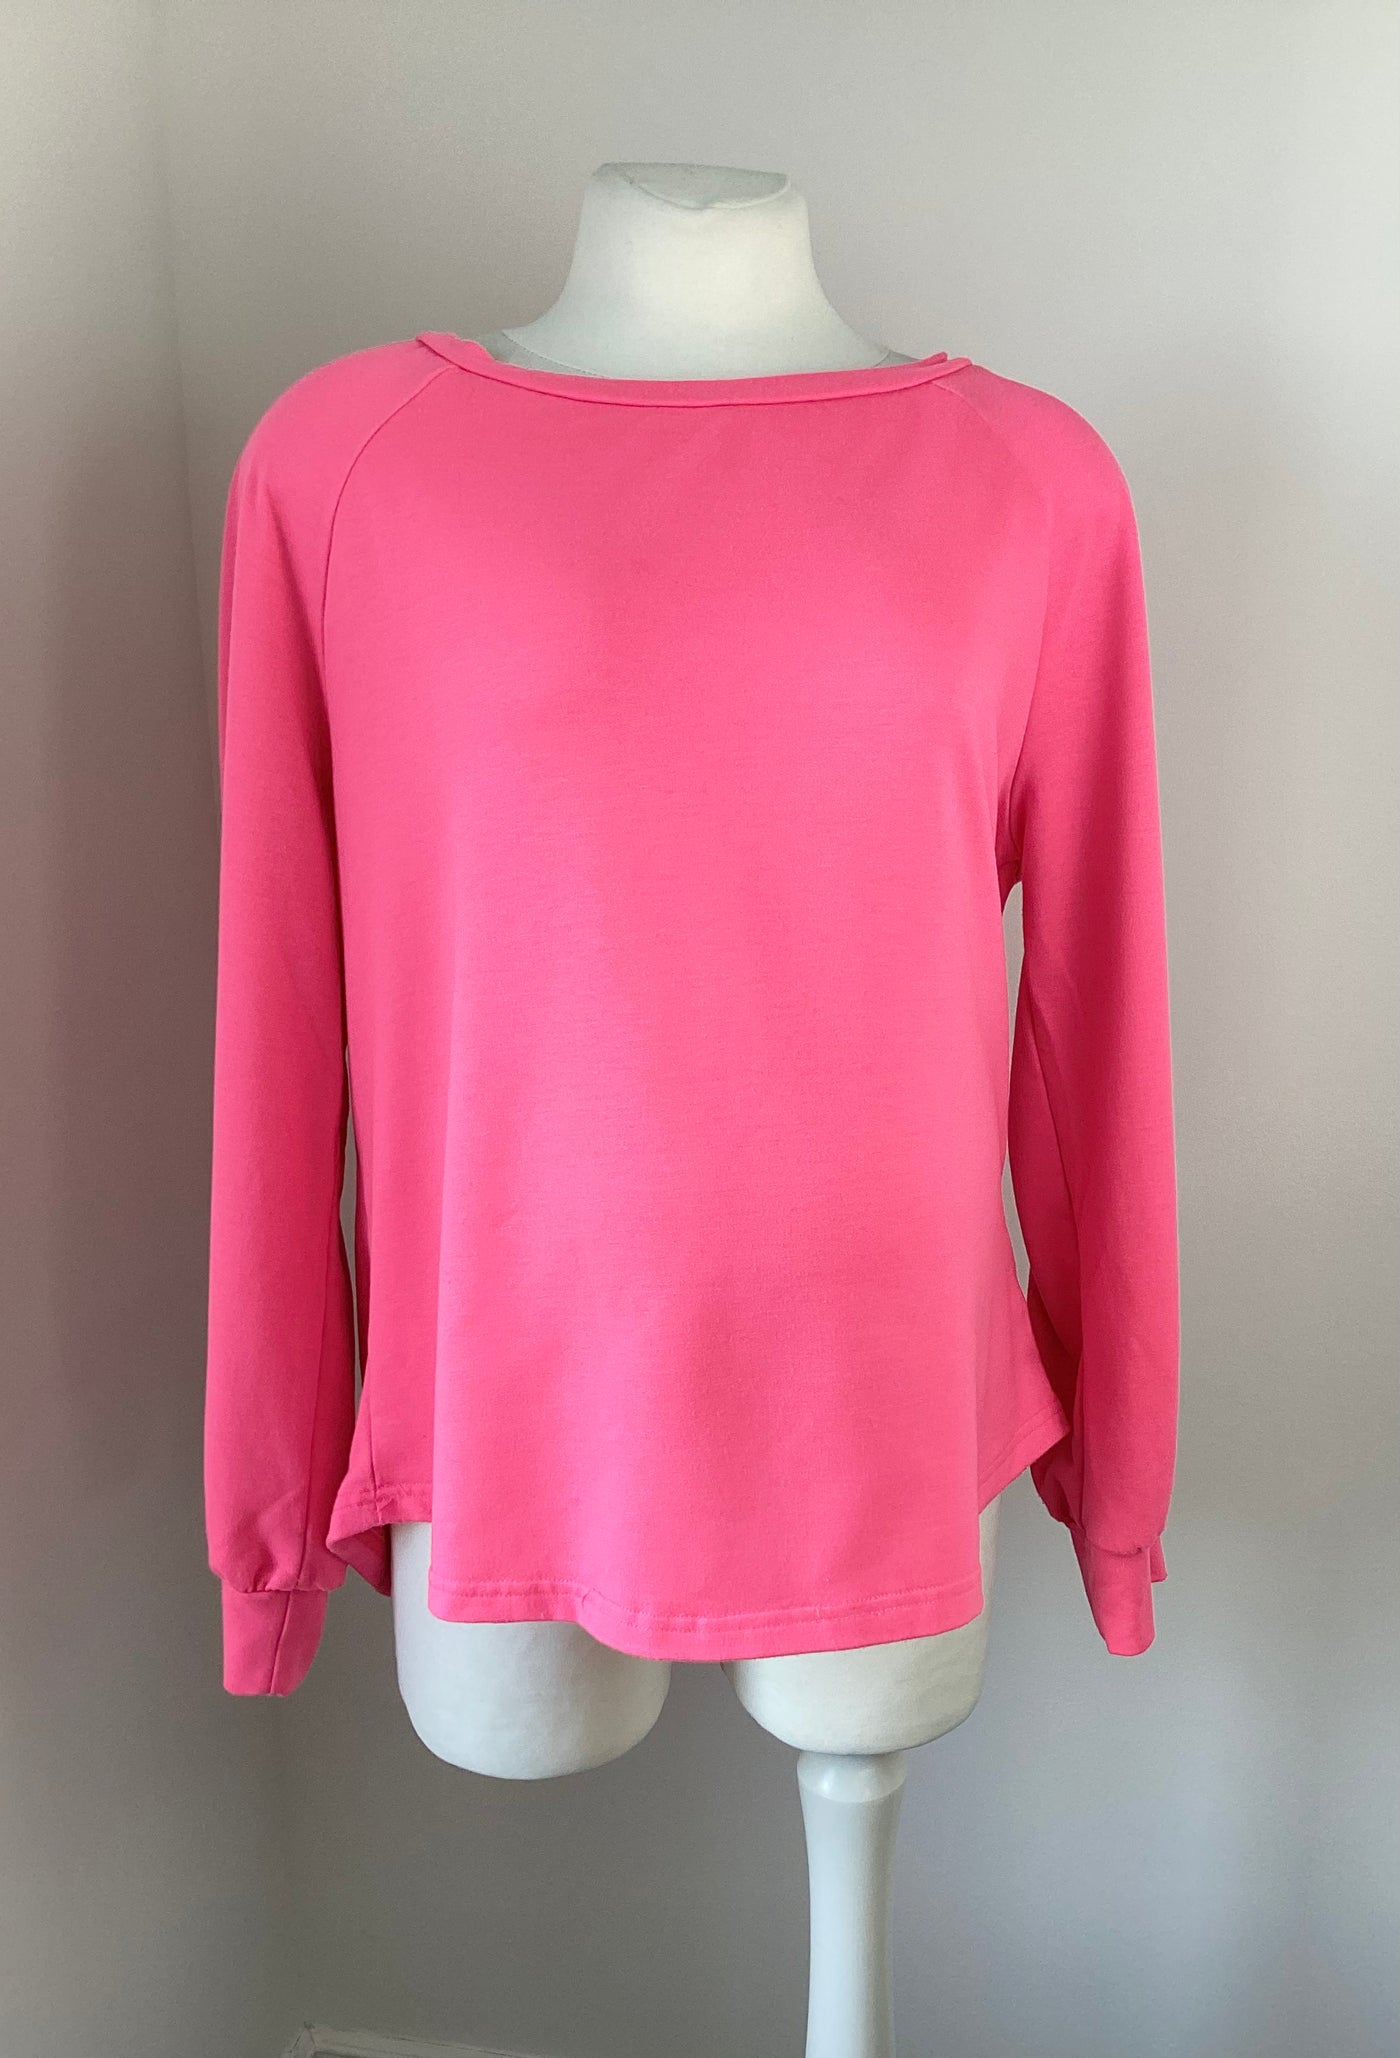 Shein Maternity neon pink long sleeved jumper - Size L (Approx UK 12/14)